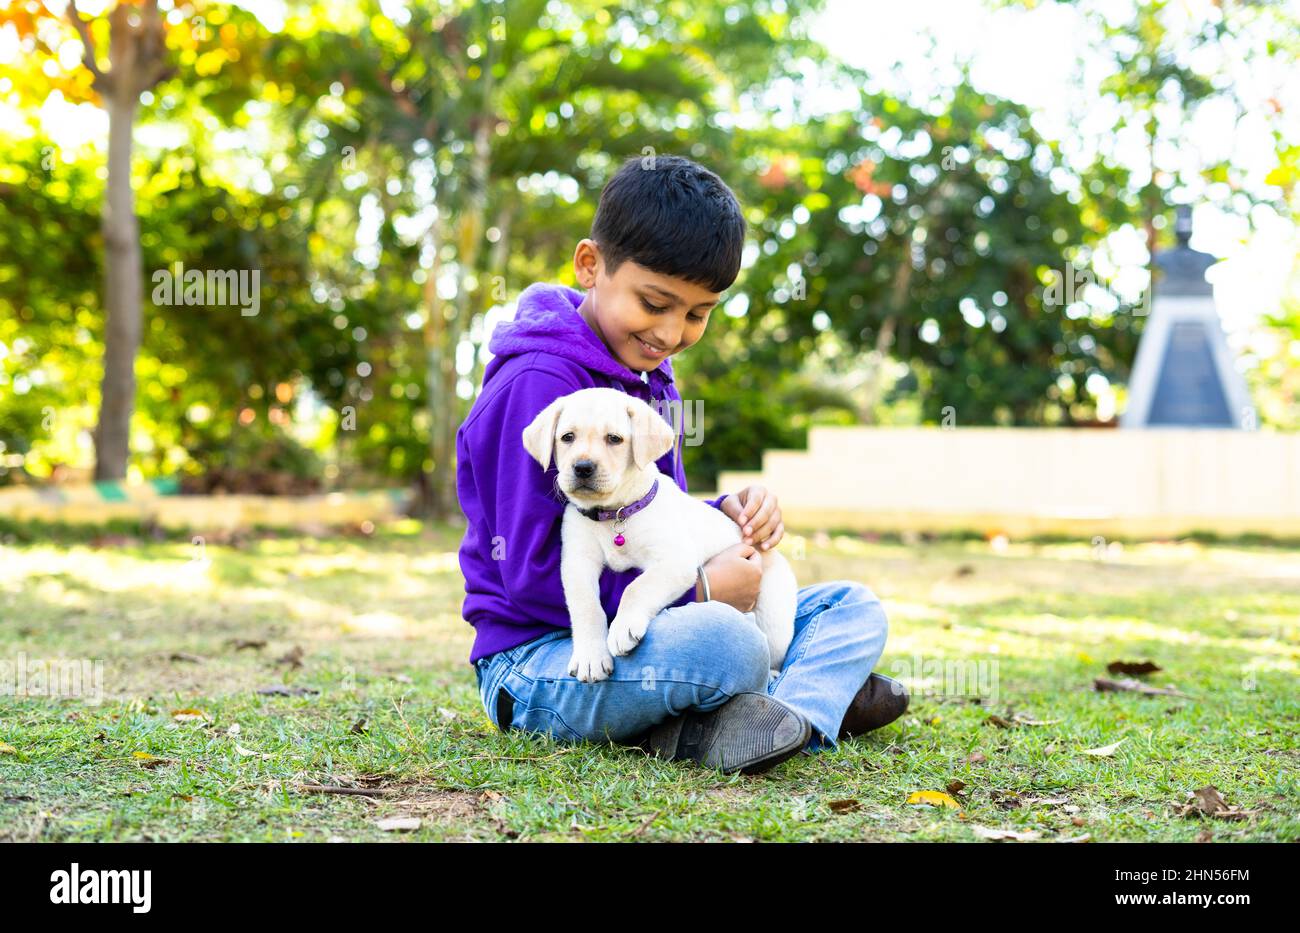 focus on dog, Young Indian Kid playing by holding puppy dog at park - concpet companion, friendship, childhood and recreation Stock Photo